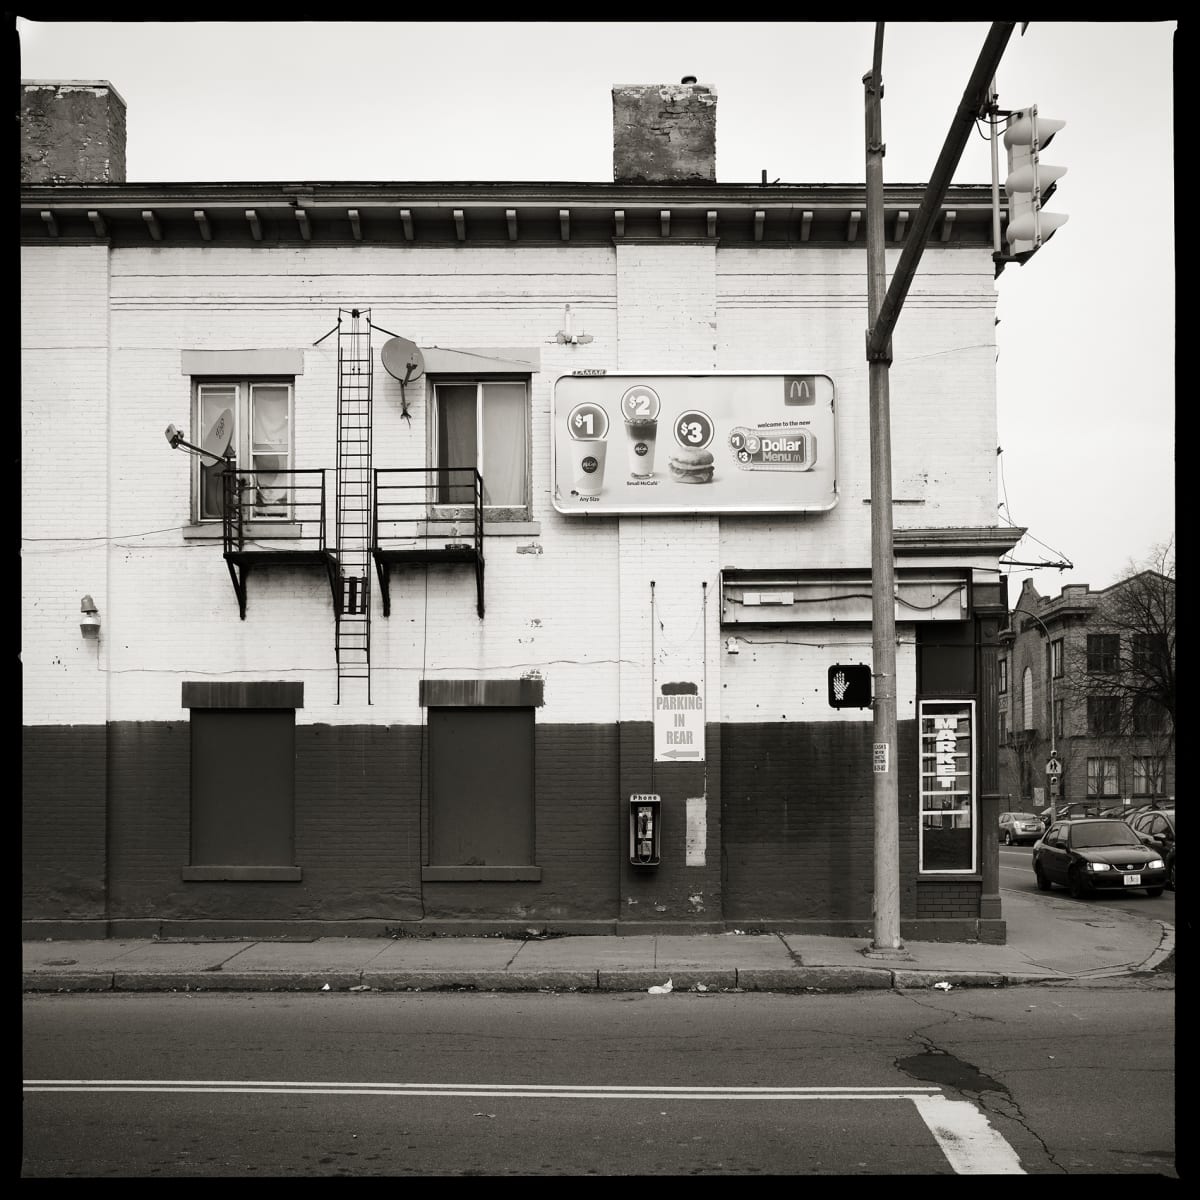 585.266.9901 – Collazo Food Mart, 609 Hudson Avenue, Rochester, NY 14621 by Eric T. Kunsman  Image: ID: A black and white image shows a two-toned building, white on top and dark grey on bottom.  There are various advertisements on the building and a fire exist on the second floor.  There is a payphone mounted on the bottom half of the building.